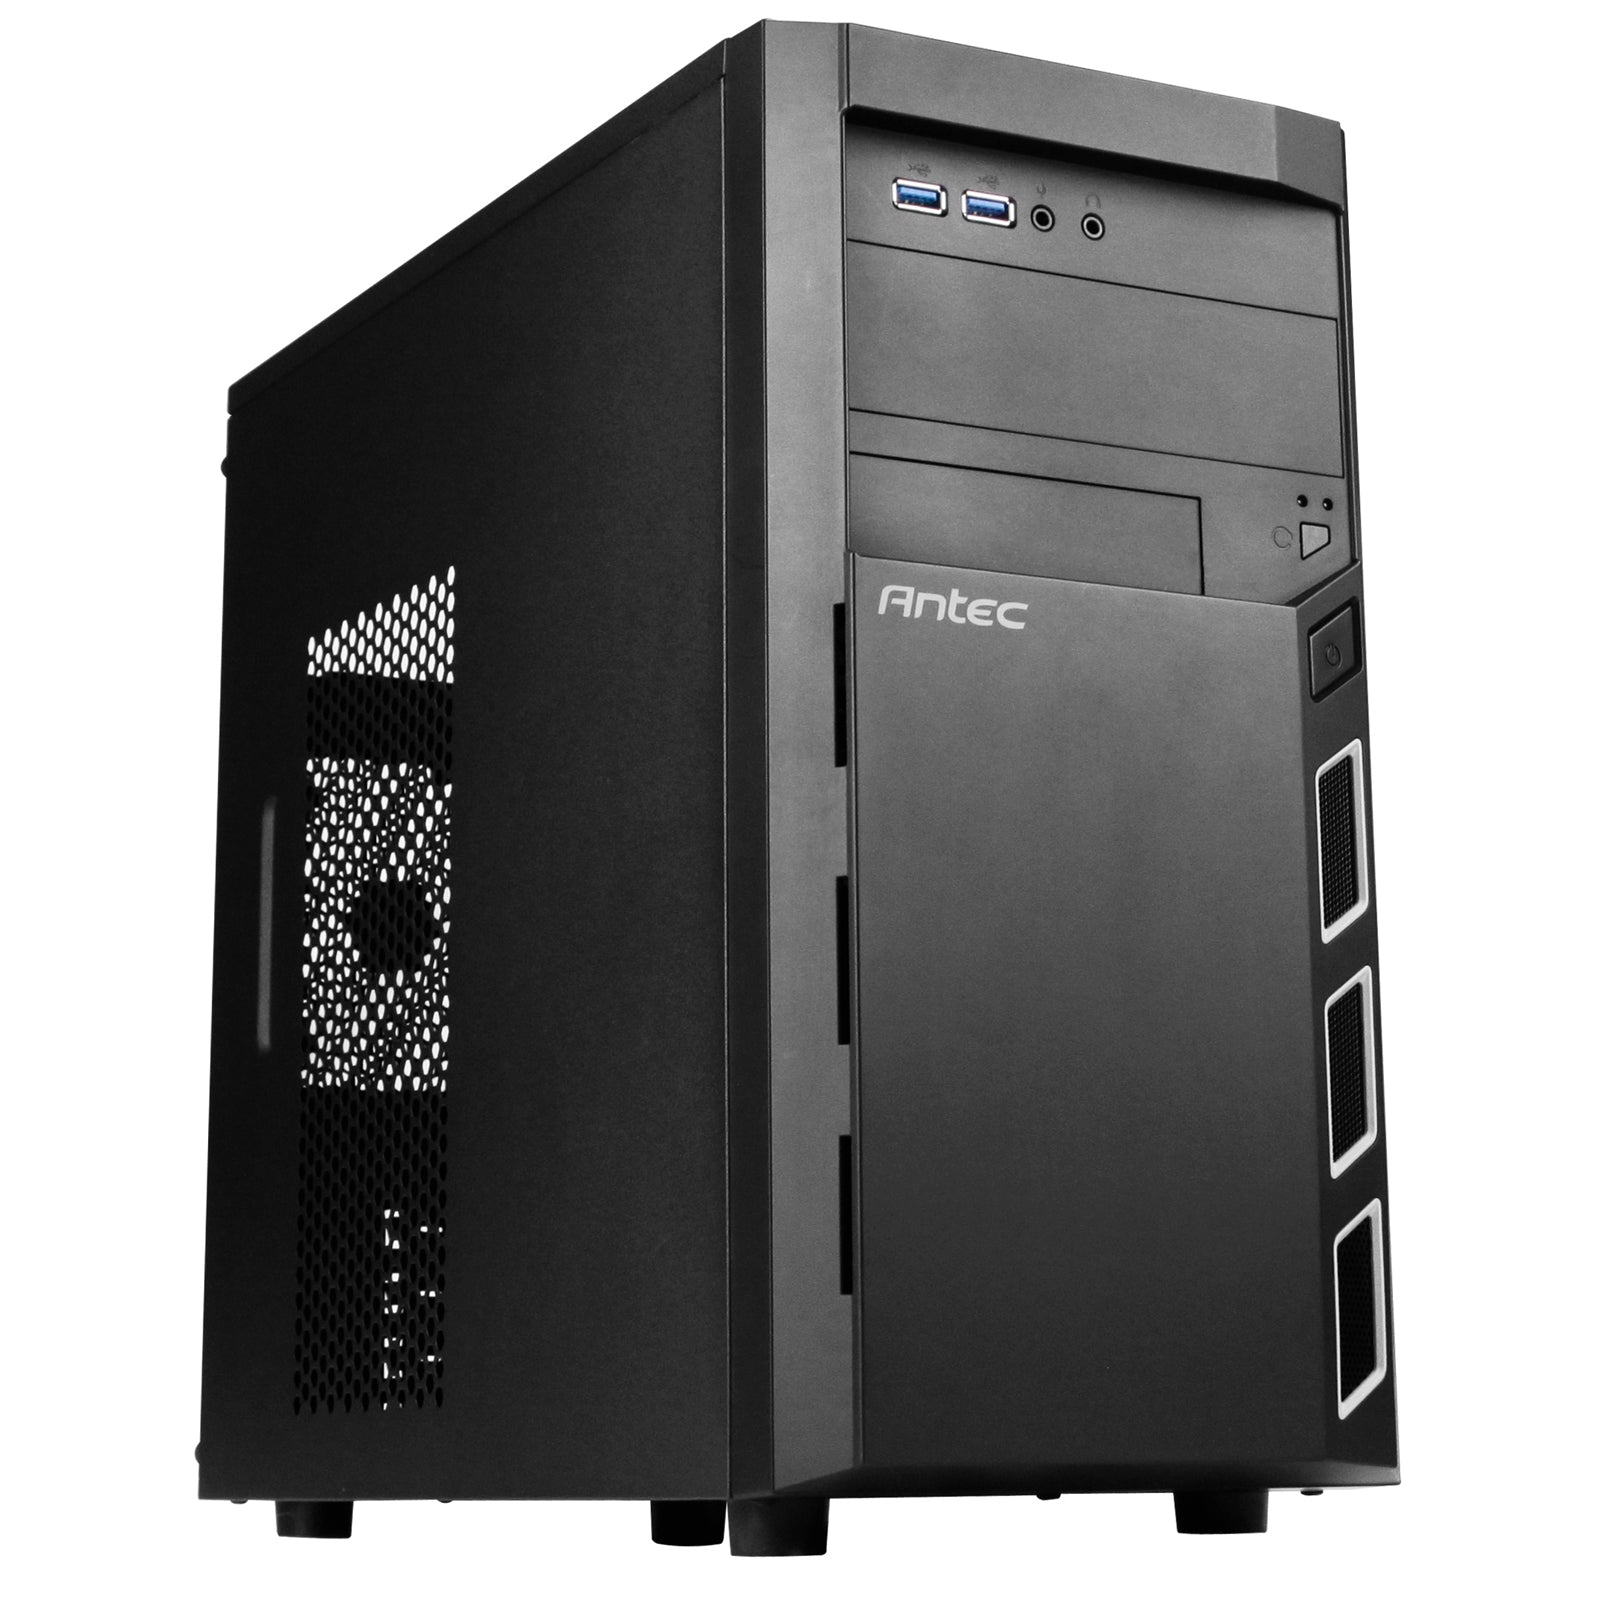 ANTEC VSK 3000 Elite Micro Tower Case Compact, Durable & High-Performance for Business